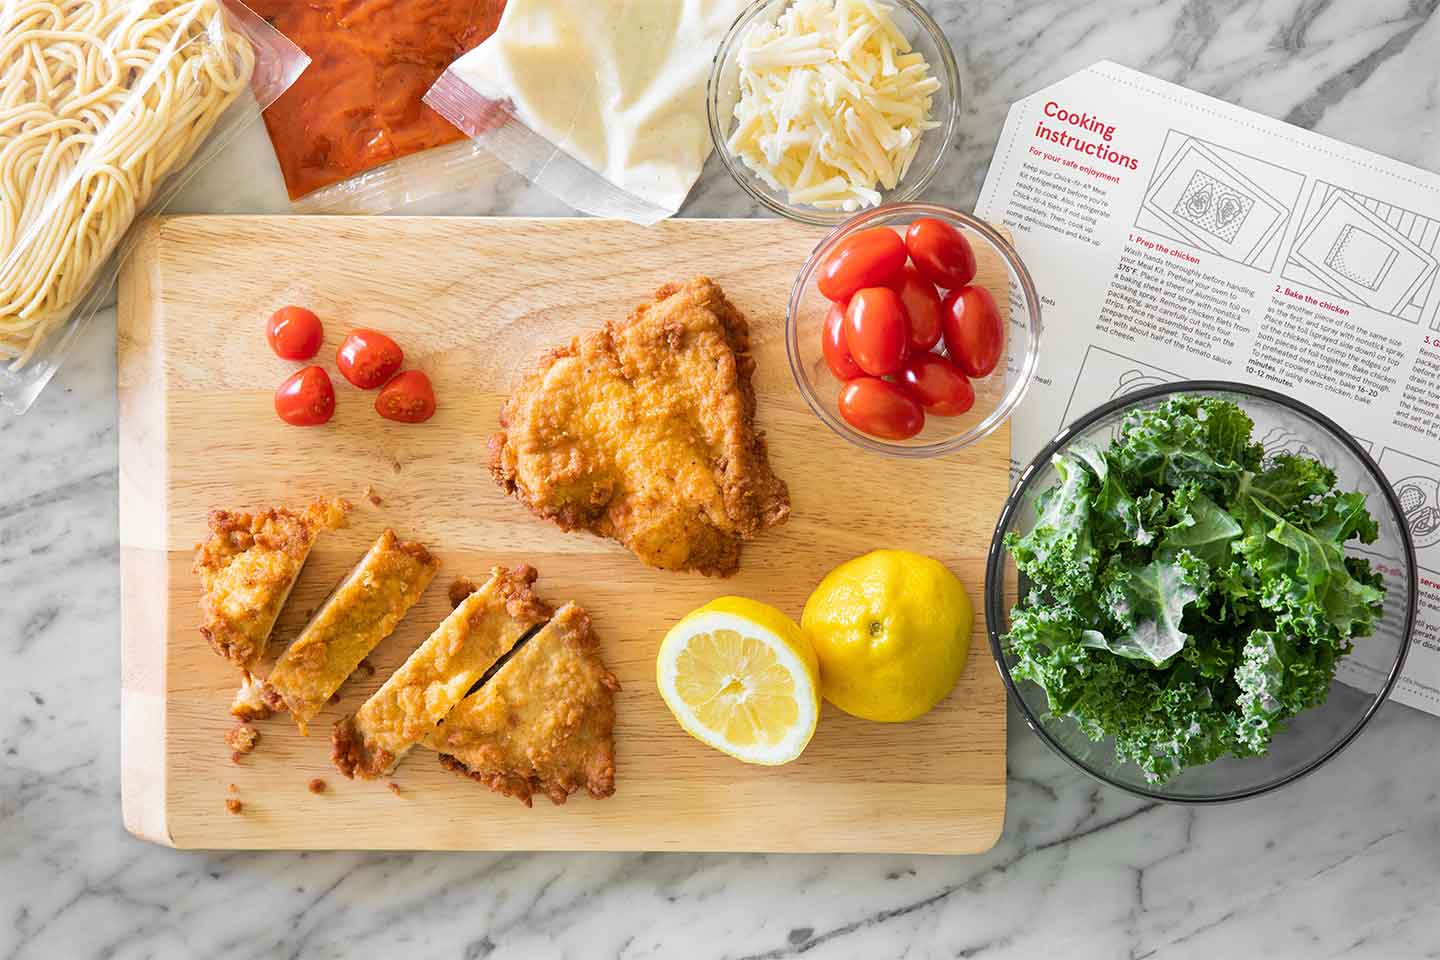 home delivery meal kits